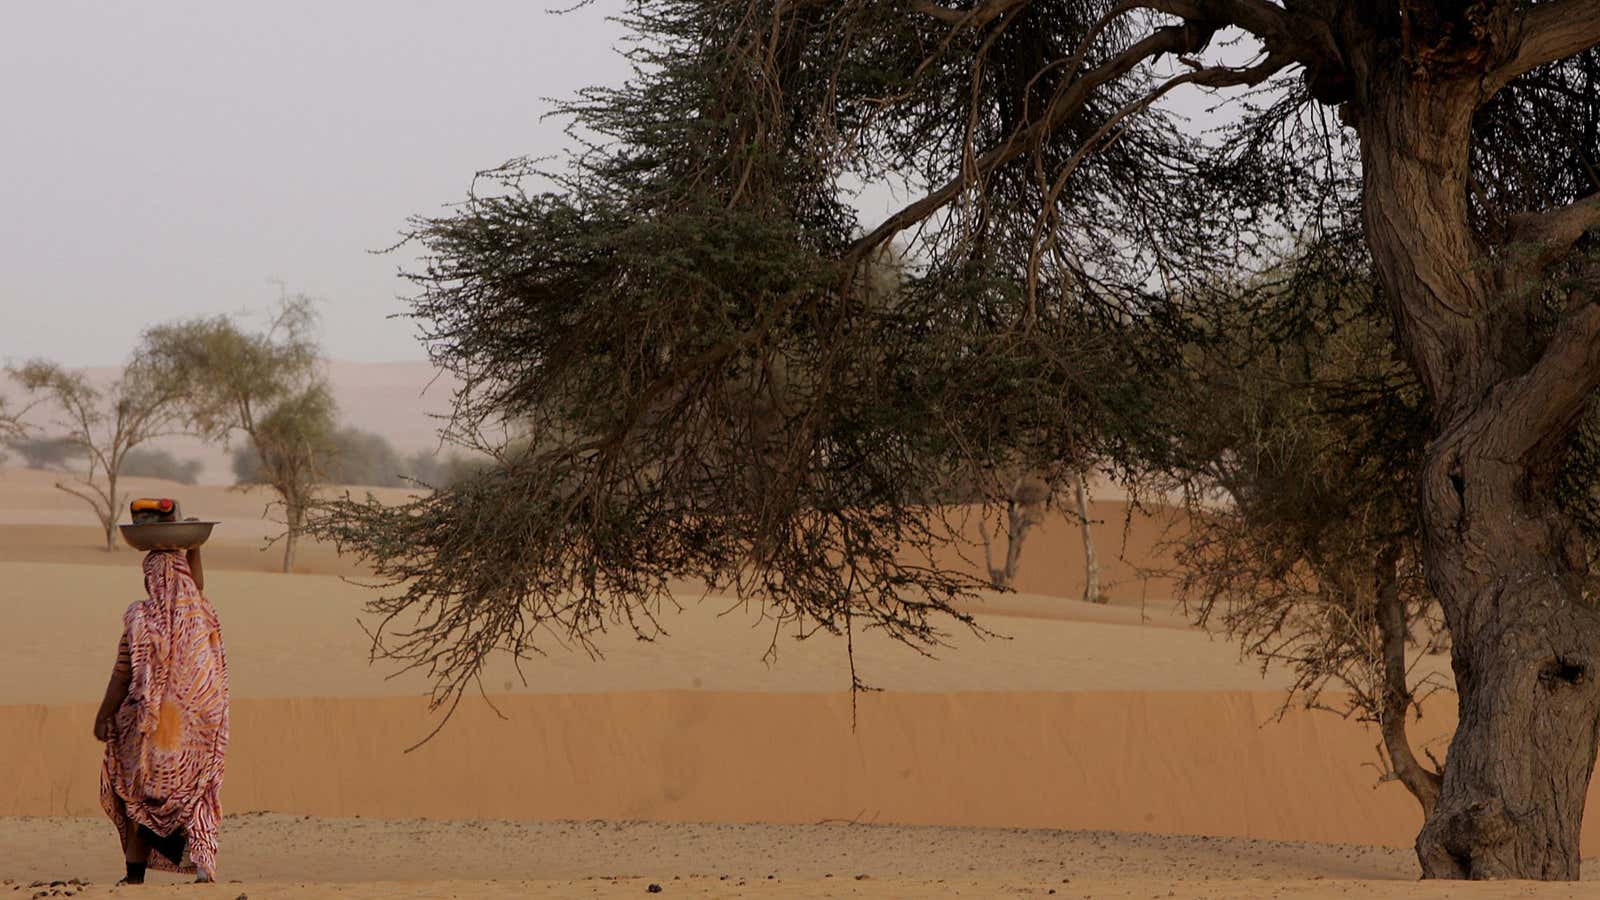 Research shows a host of trees retreating from the arid region south of the Sahara Desert known as the Sahel.